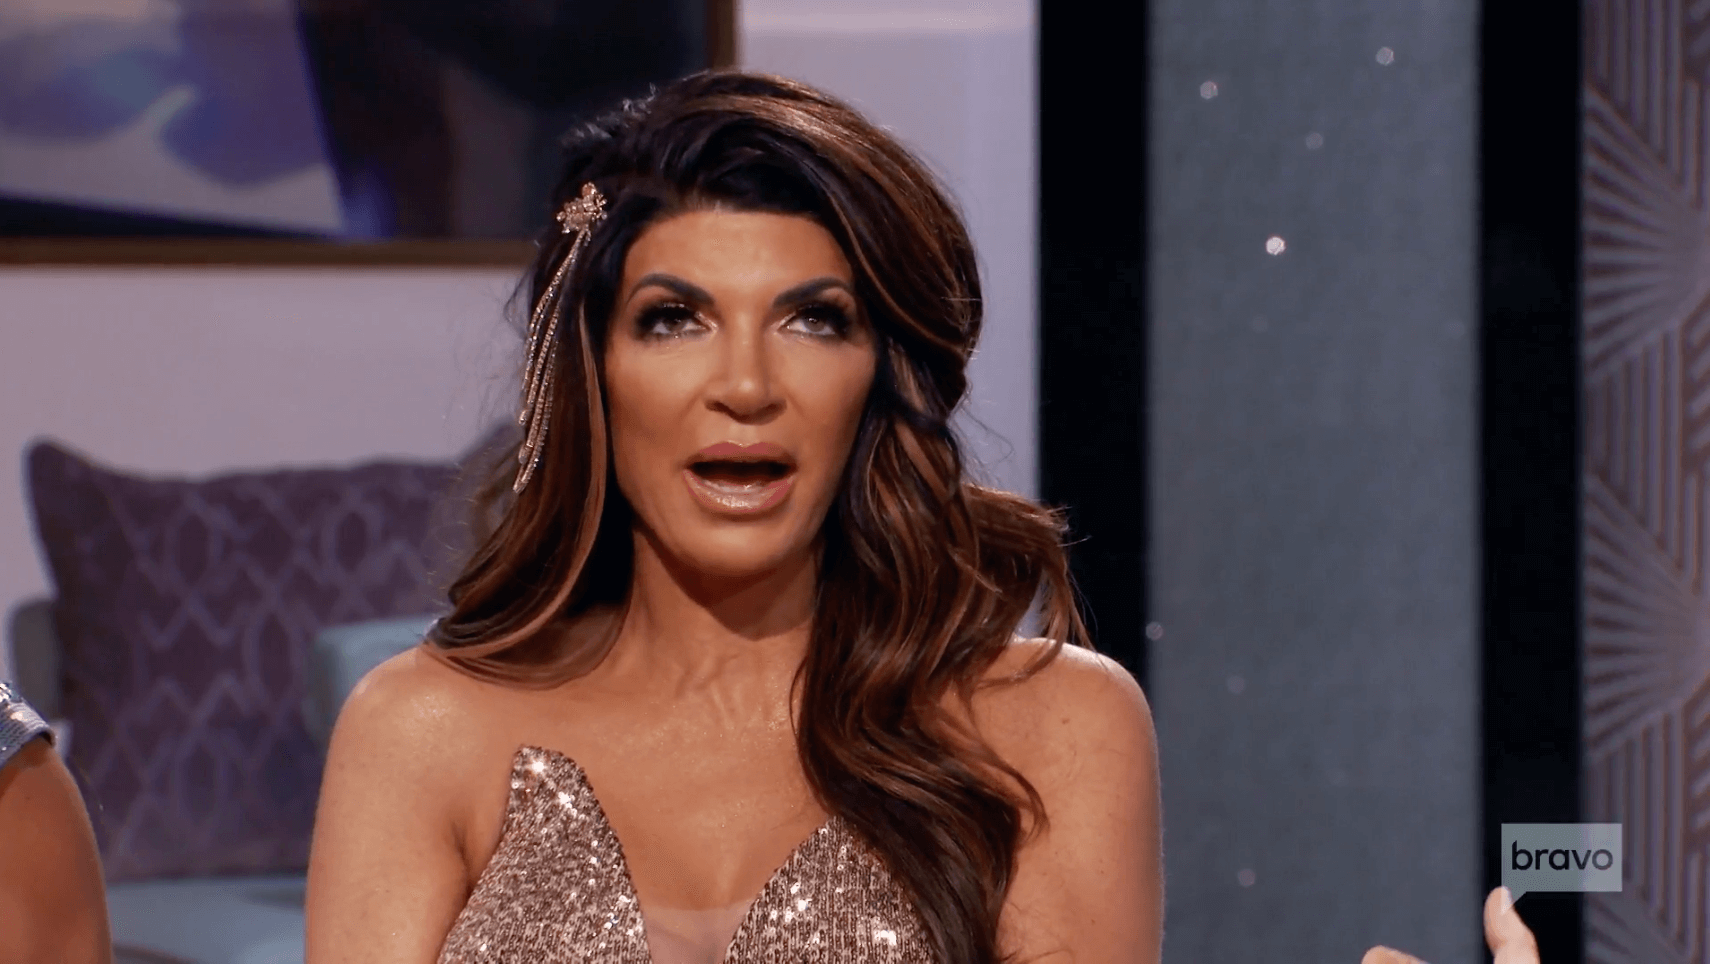 ‘RHONJ’ RECAP: Teresa Giudice Ended Her Friendship With Danielle Staub Because She “Ratted” Her Out!